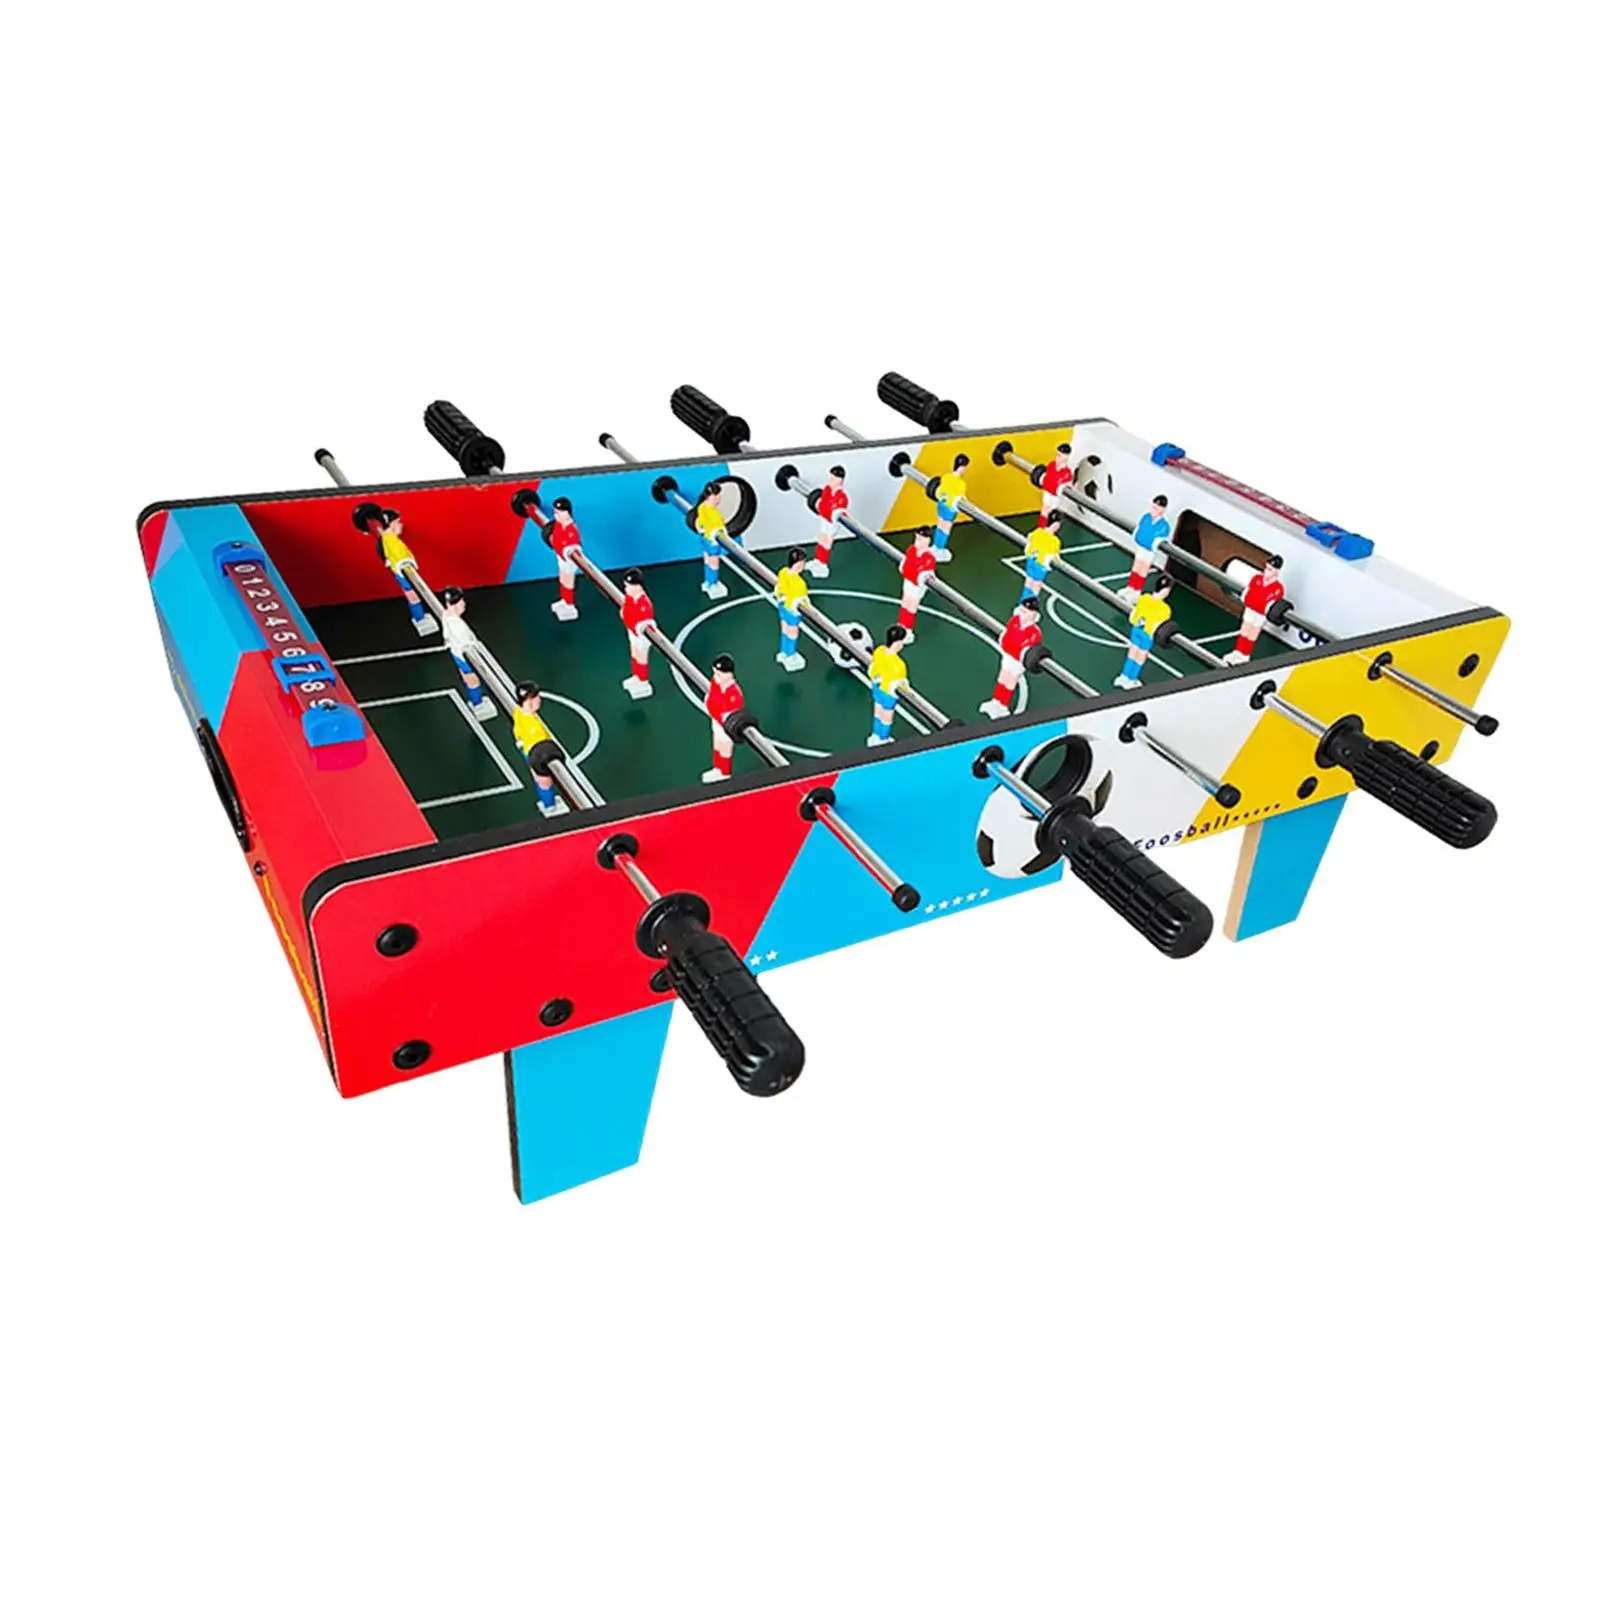 Small Foosball Table Educational Toy Interactive Toy Table Top Soccer Game Table Football Game for Holiday Gifts Family Night